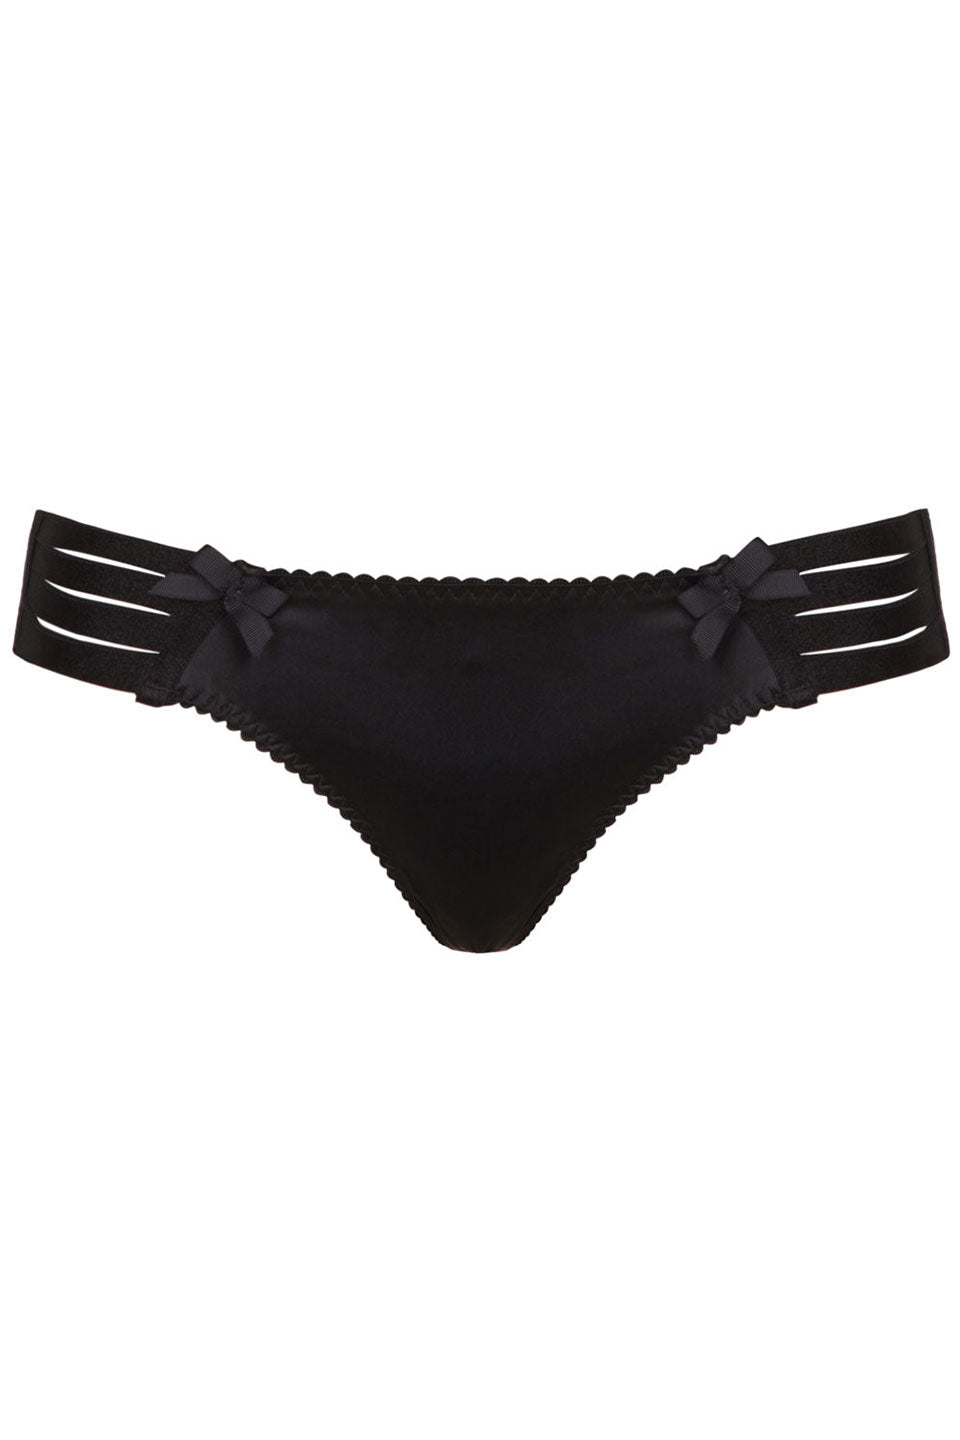 Atelier bordelle webbed thong black front. Product gallery 1